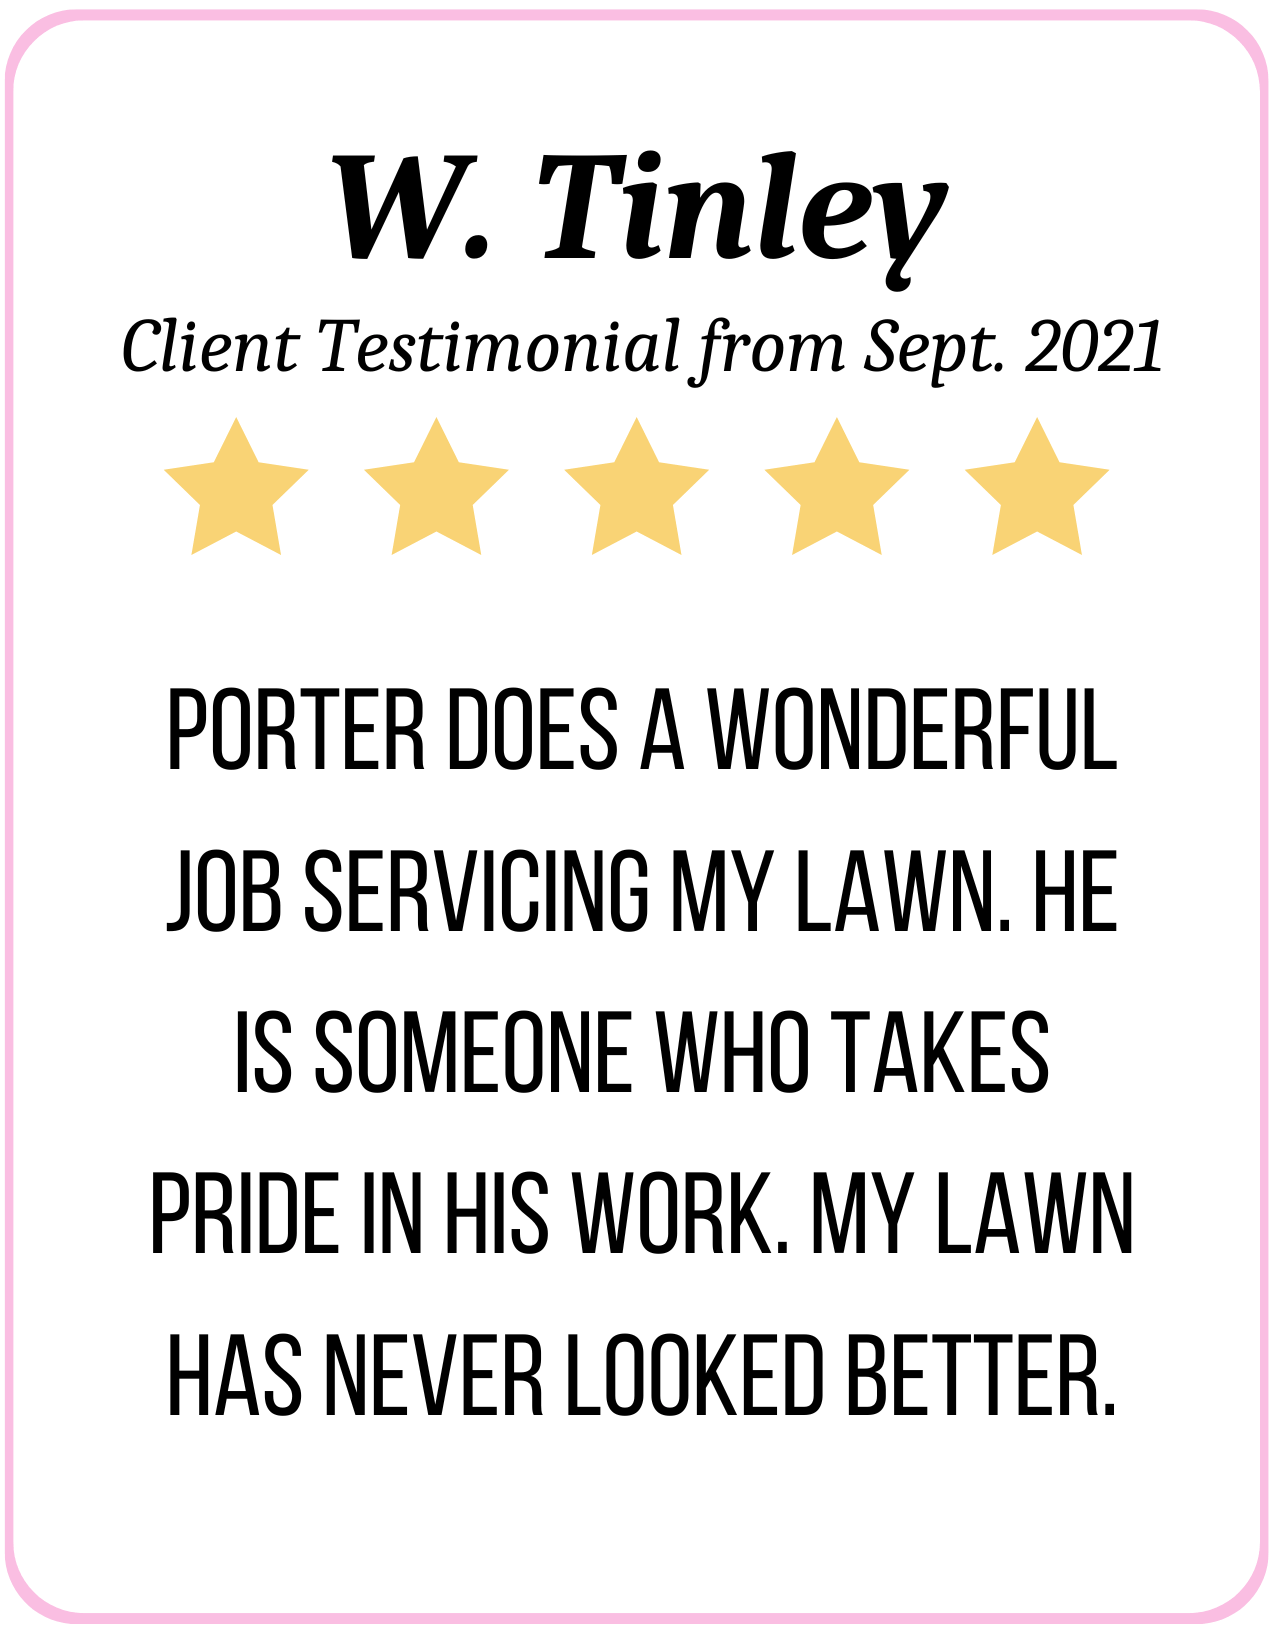 5 Stars: Porter does a wonderful job servicing my lawn. He is someone who takes pride in his work. My lawn has never looked better. - W. Tinley Sept. 2021